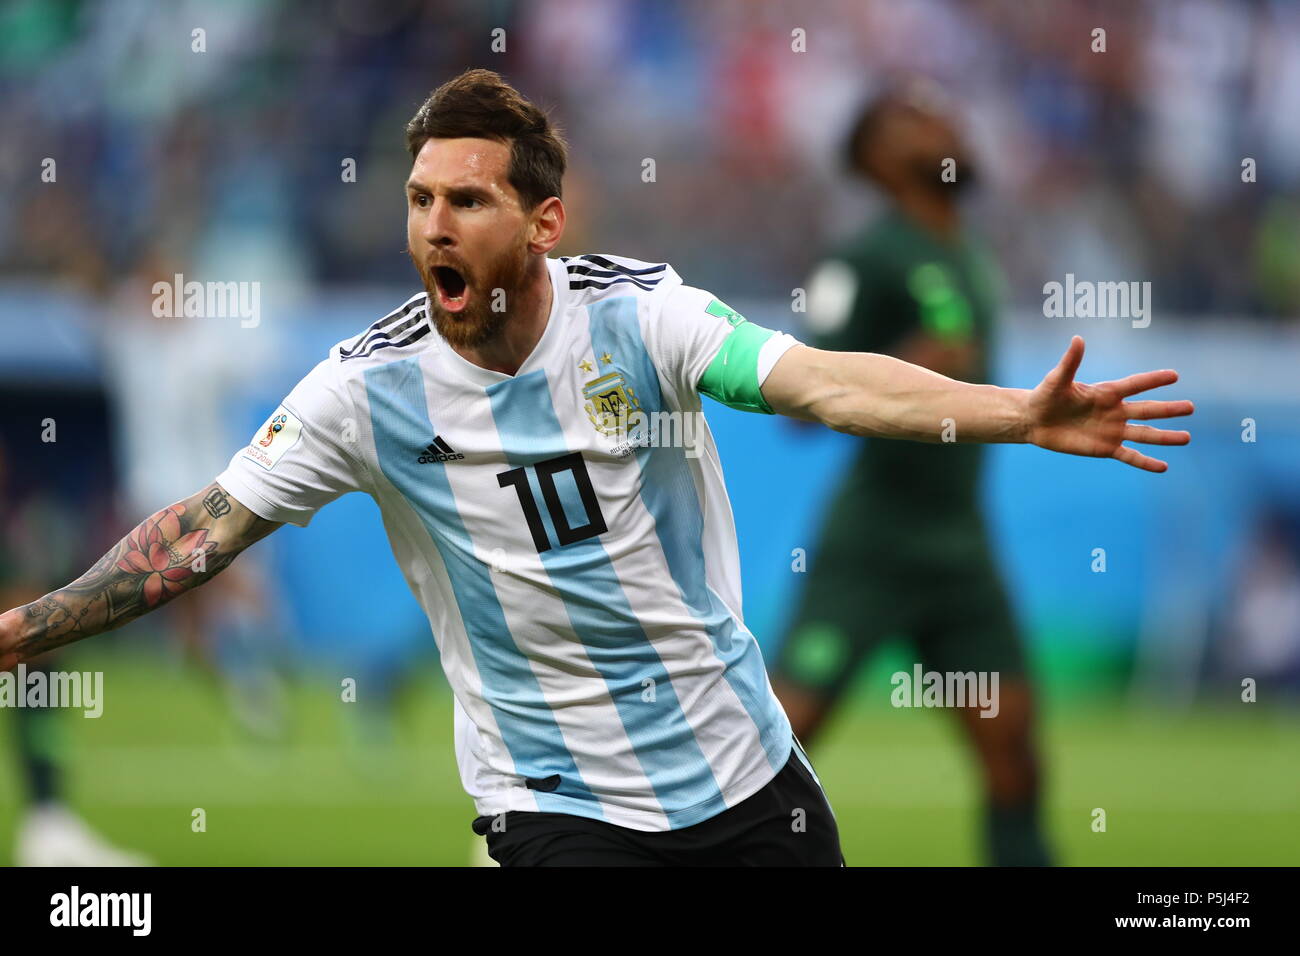 Lionel Messi (ARG) of Argentina celebrates after scoring his teams's opening goal during the FIFA World Cup Group D match between Nigeria 1-2 Argentina at St. Petersburg Stadium in St. Petersburg in Russia. June 26, 2018. Credit: Kenzaburo Matsuoka/AFLO/Alamy Live News Stock Photo